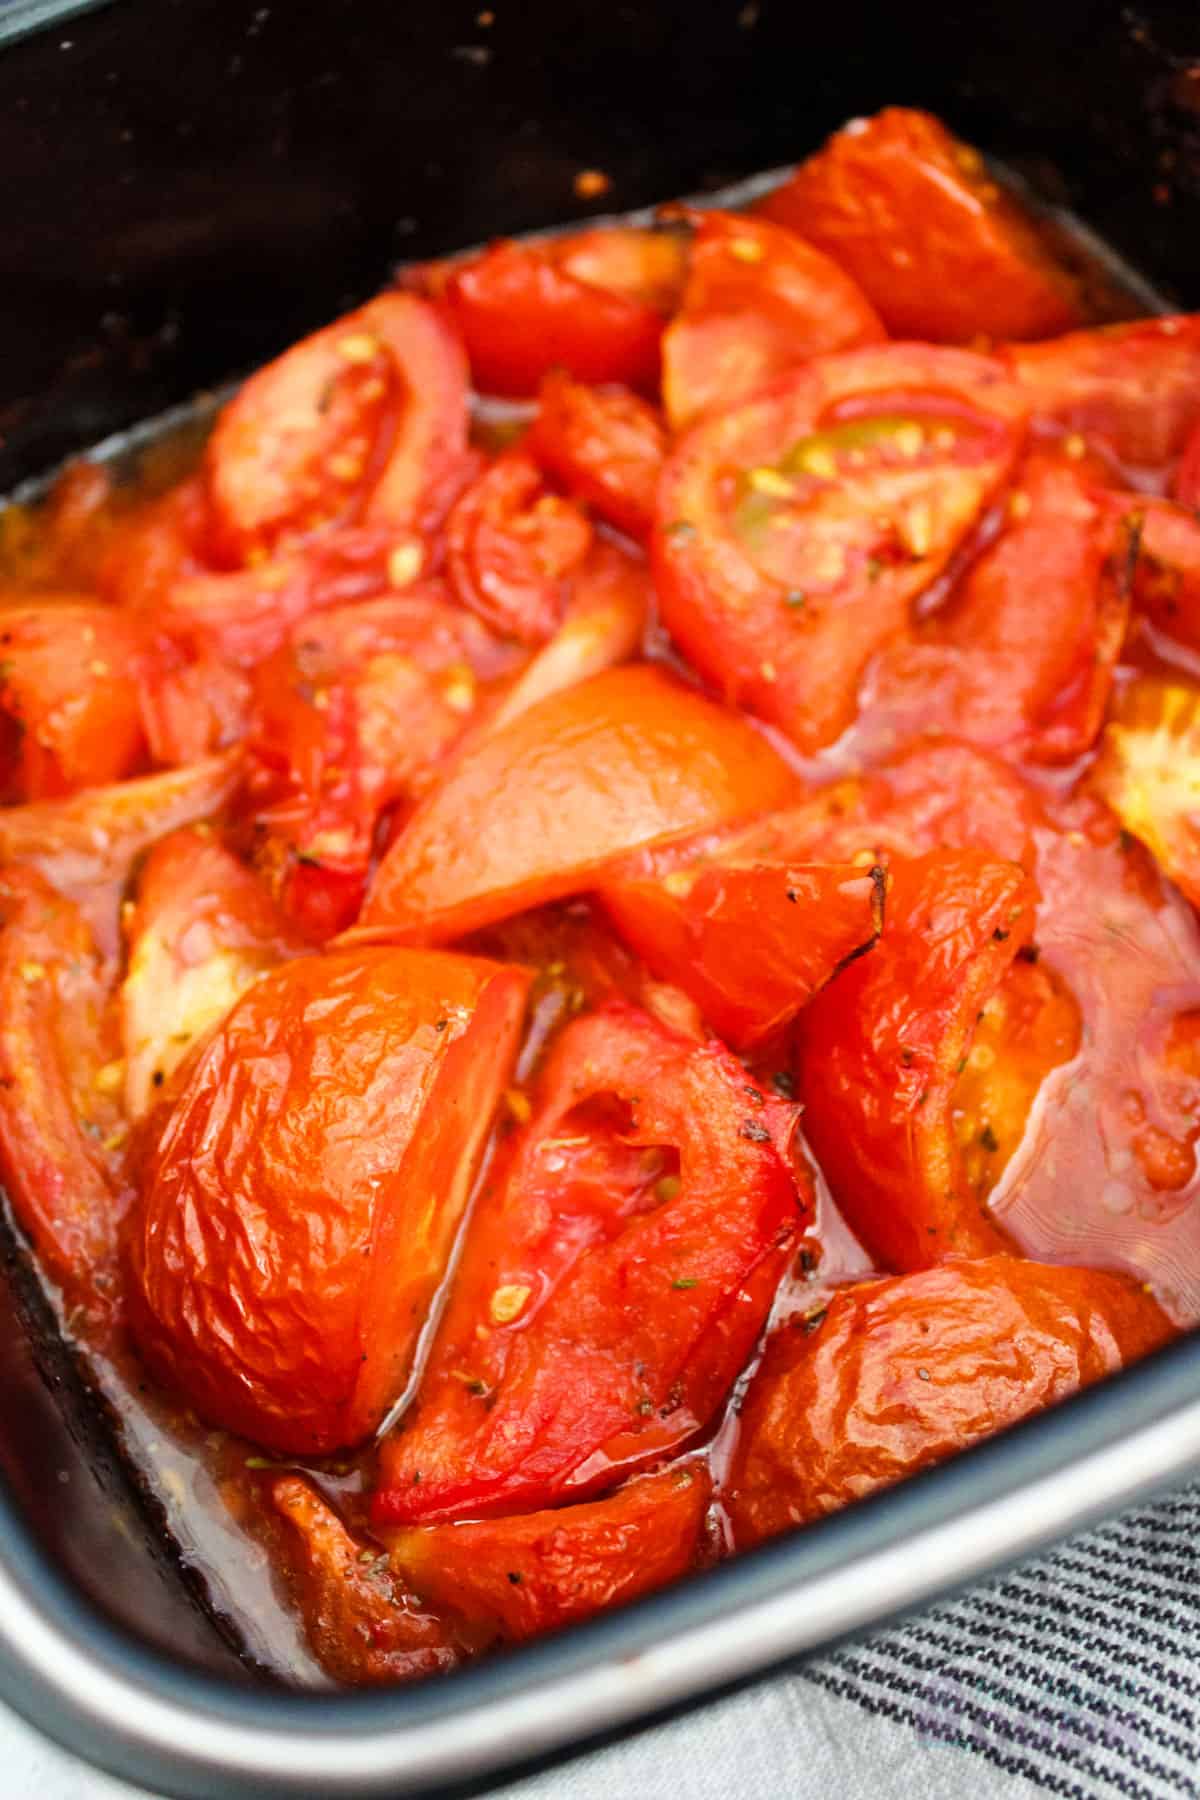 Close-up of a baking dish with roasted tomatoes inside.